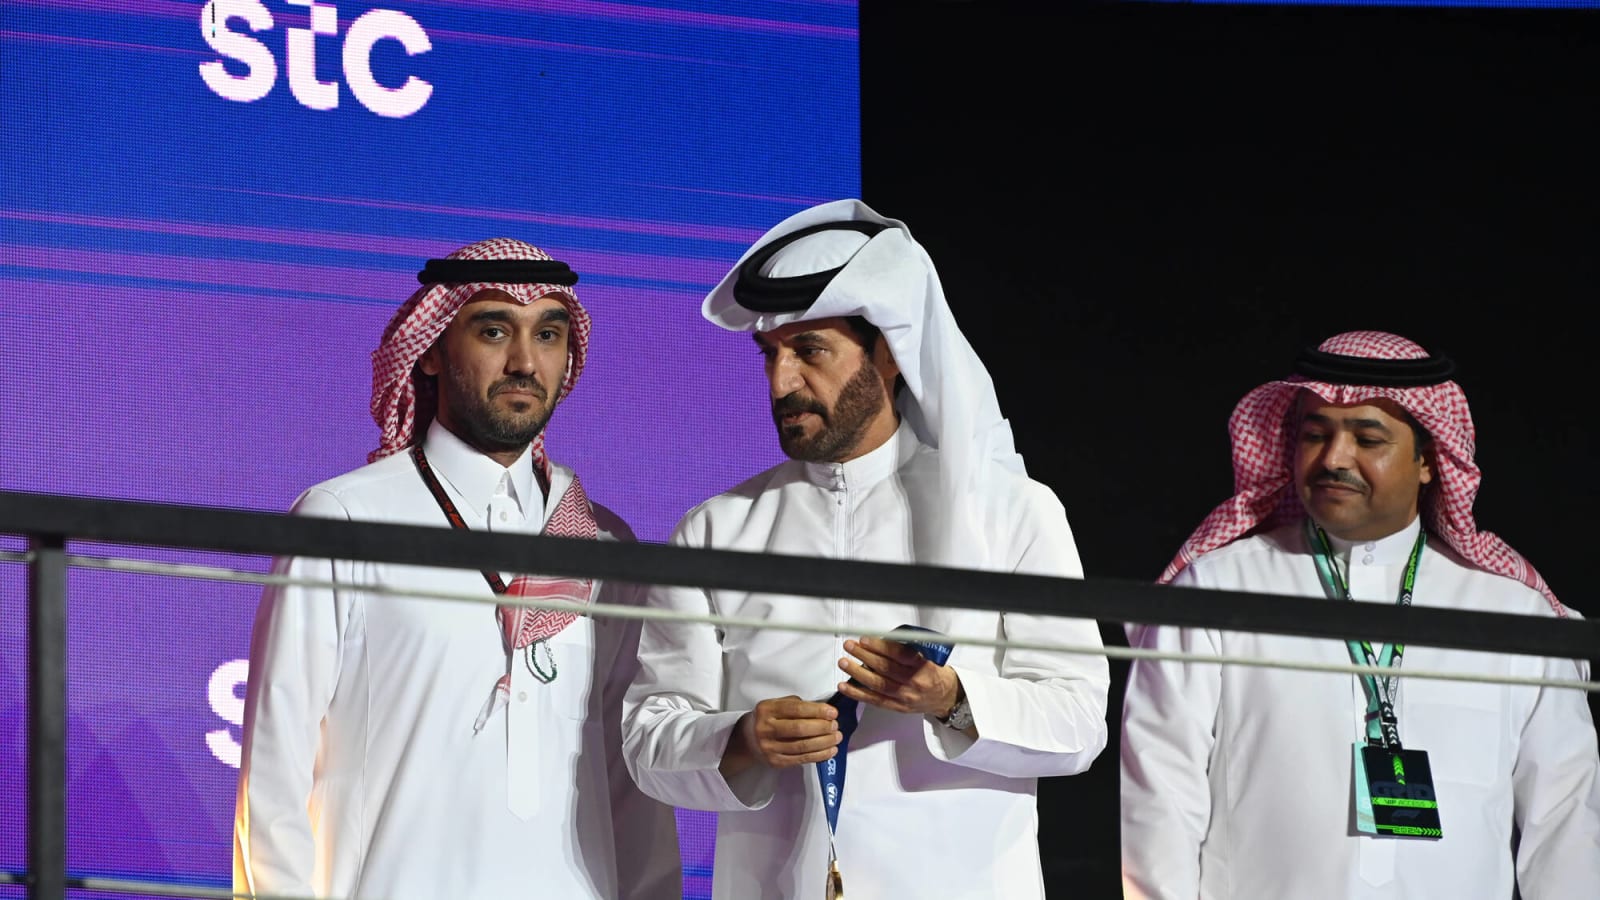 Toto Wolff calls for utmost-transparency in the Mohammed Ben Sulayem race-intervention saga